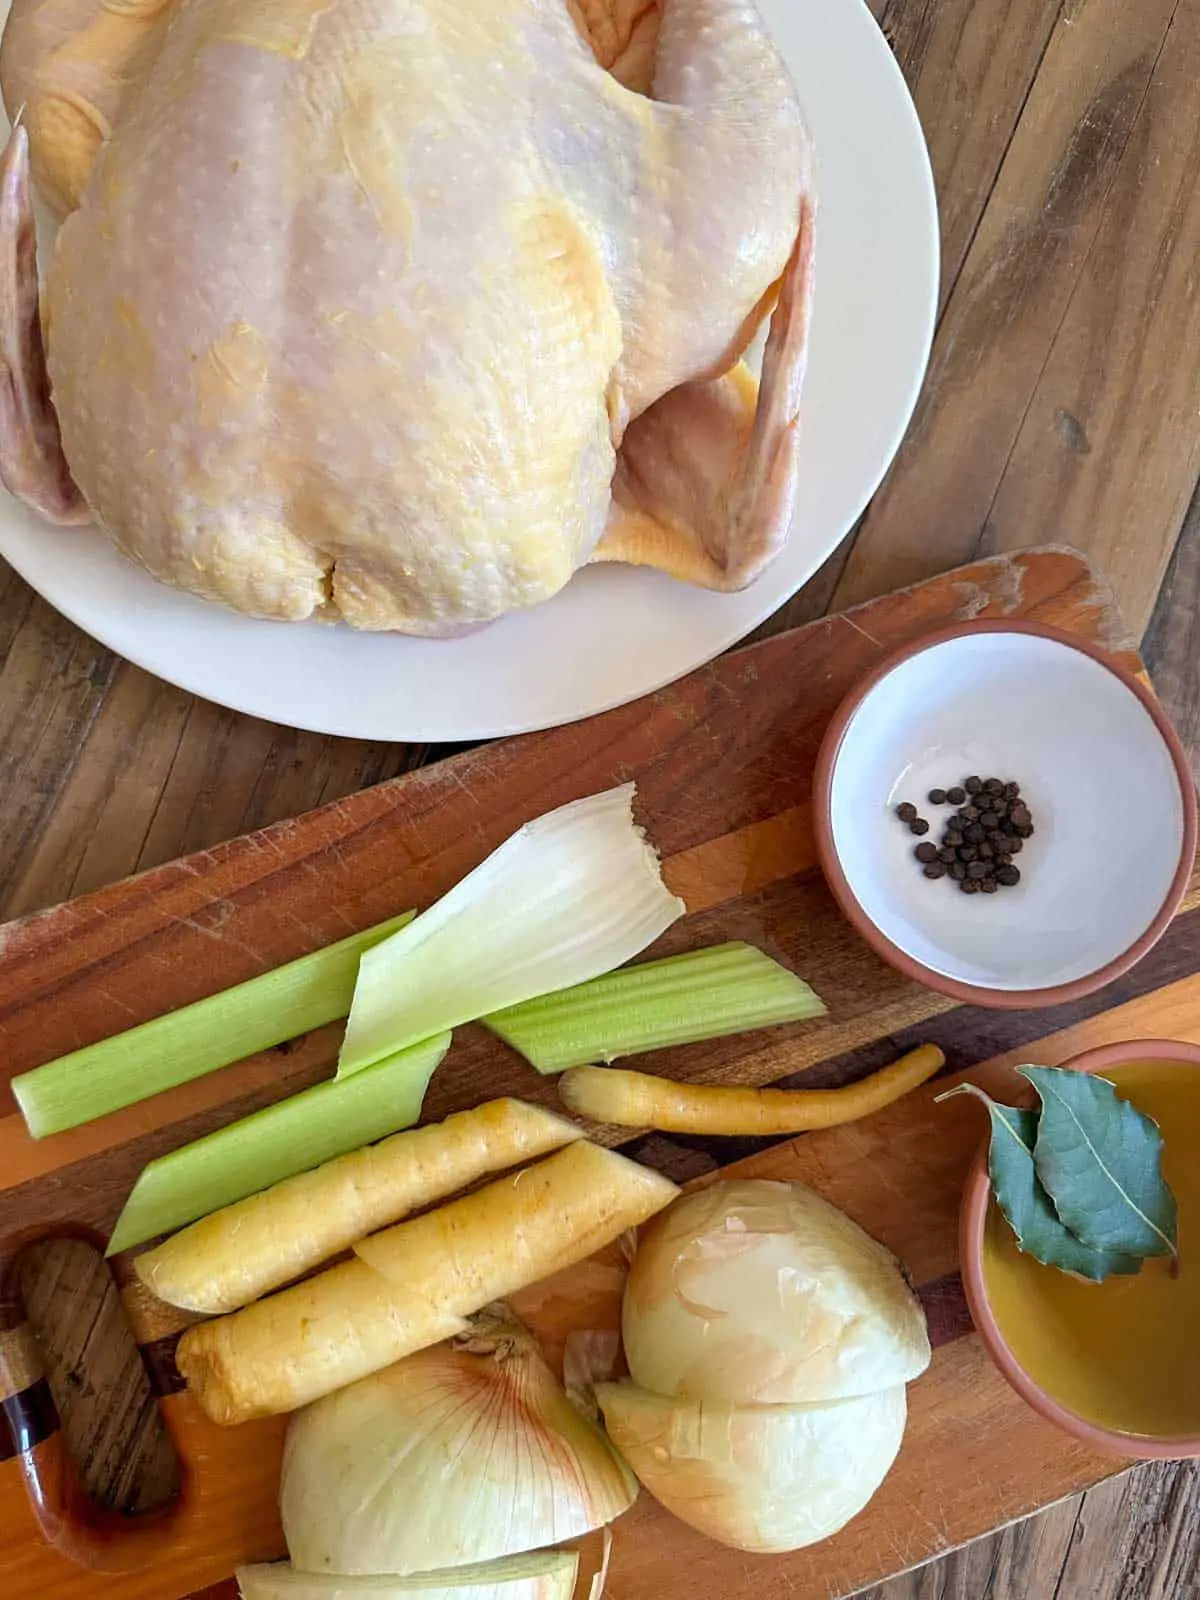 A whole uncooked chicken on a white plate. There is a wooden cutting board with celery, carrots, onions, bay leaves and peppercorns on it.